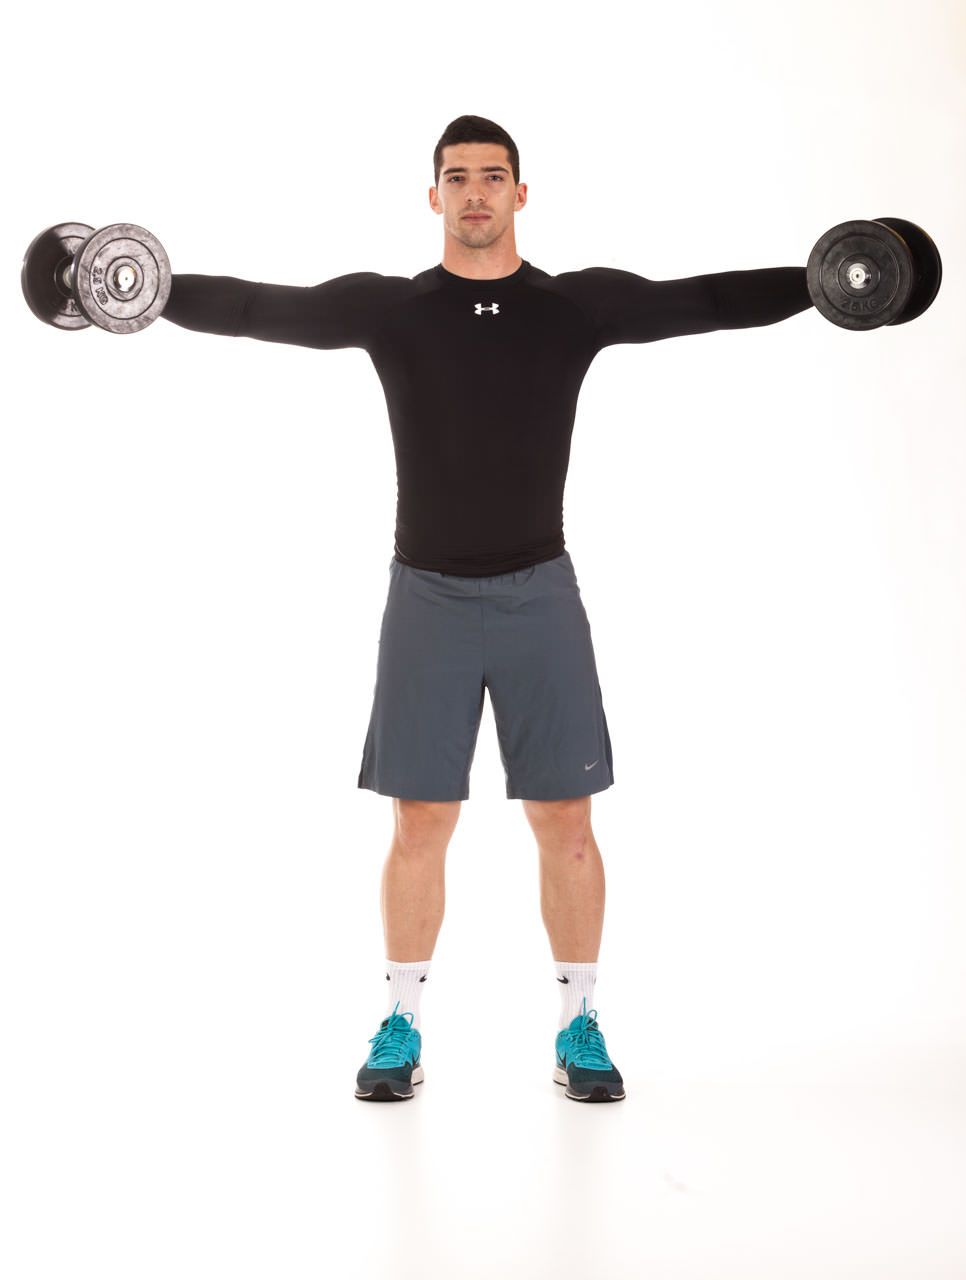 Two-Dumbbell Lateral Raise frame #2